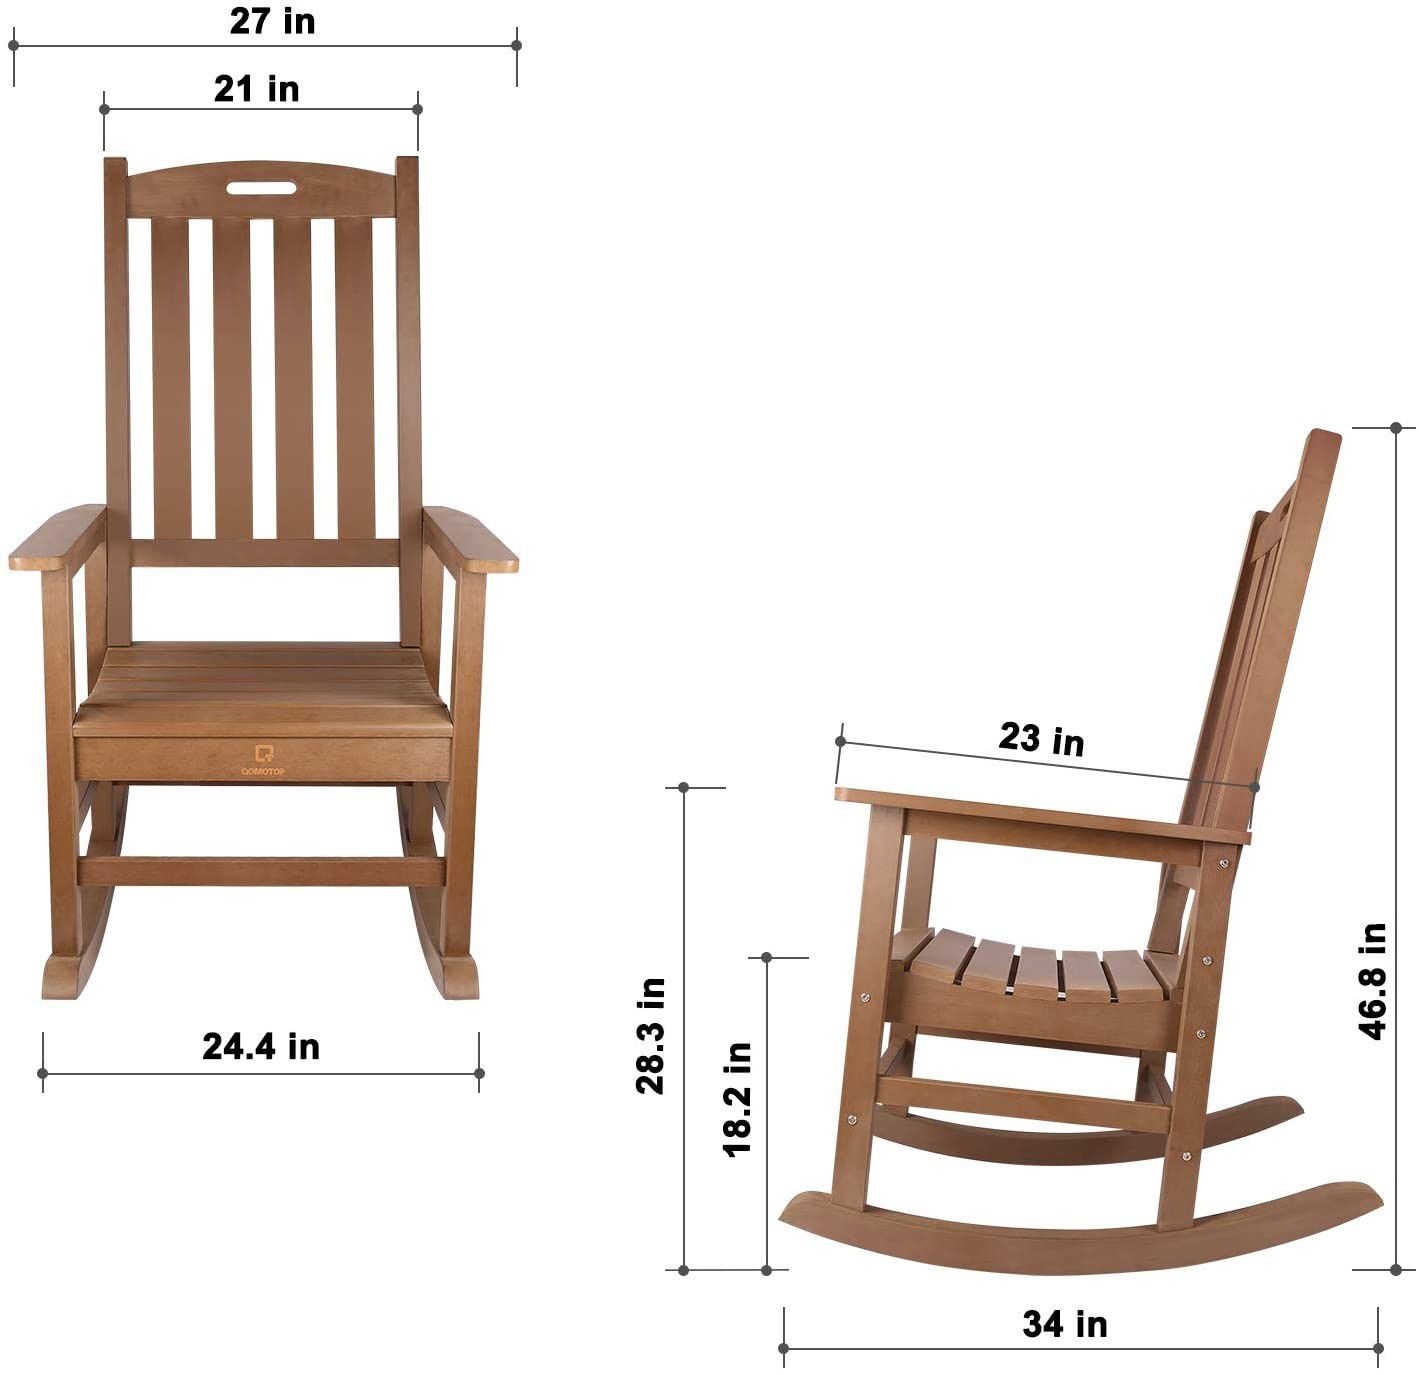 Outdoor Rocking Chair, Poly Lumber Patio Porch Rocker Chair Supports up to 350 lbs, Brown